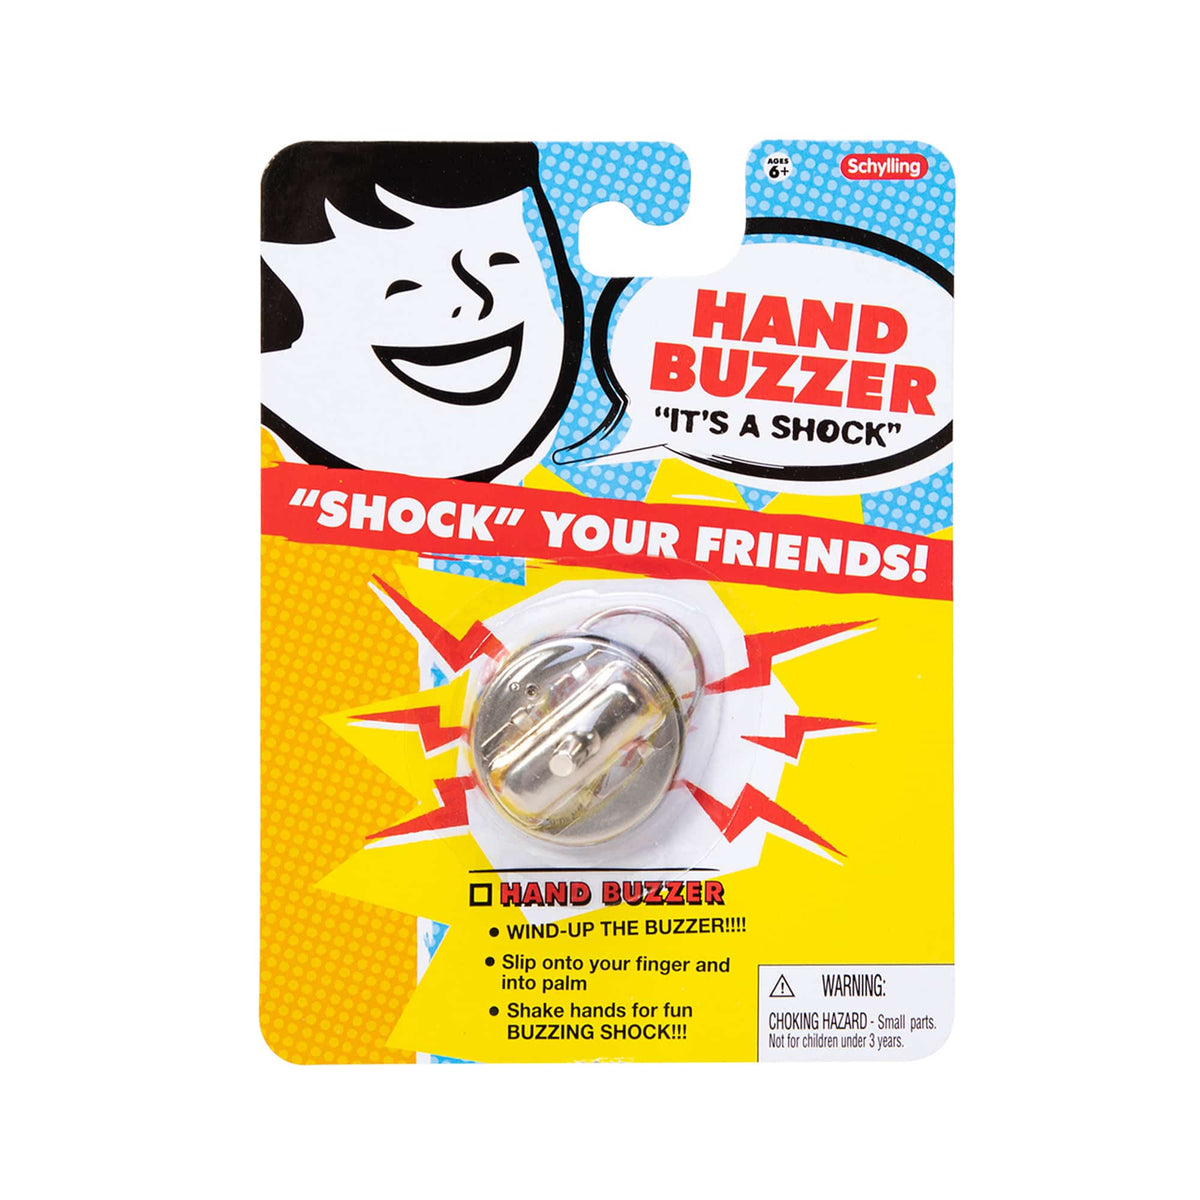 Front view of hand buzzer from the Joke Box.